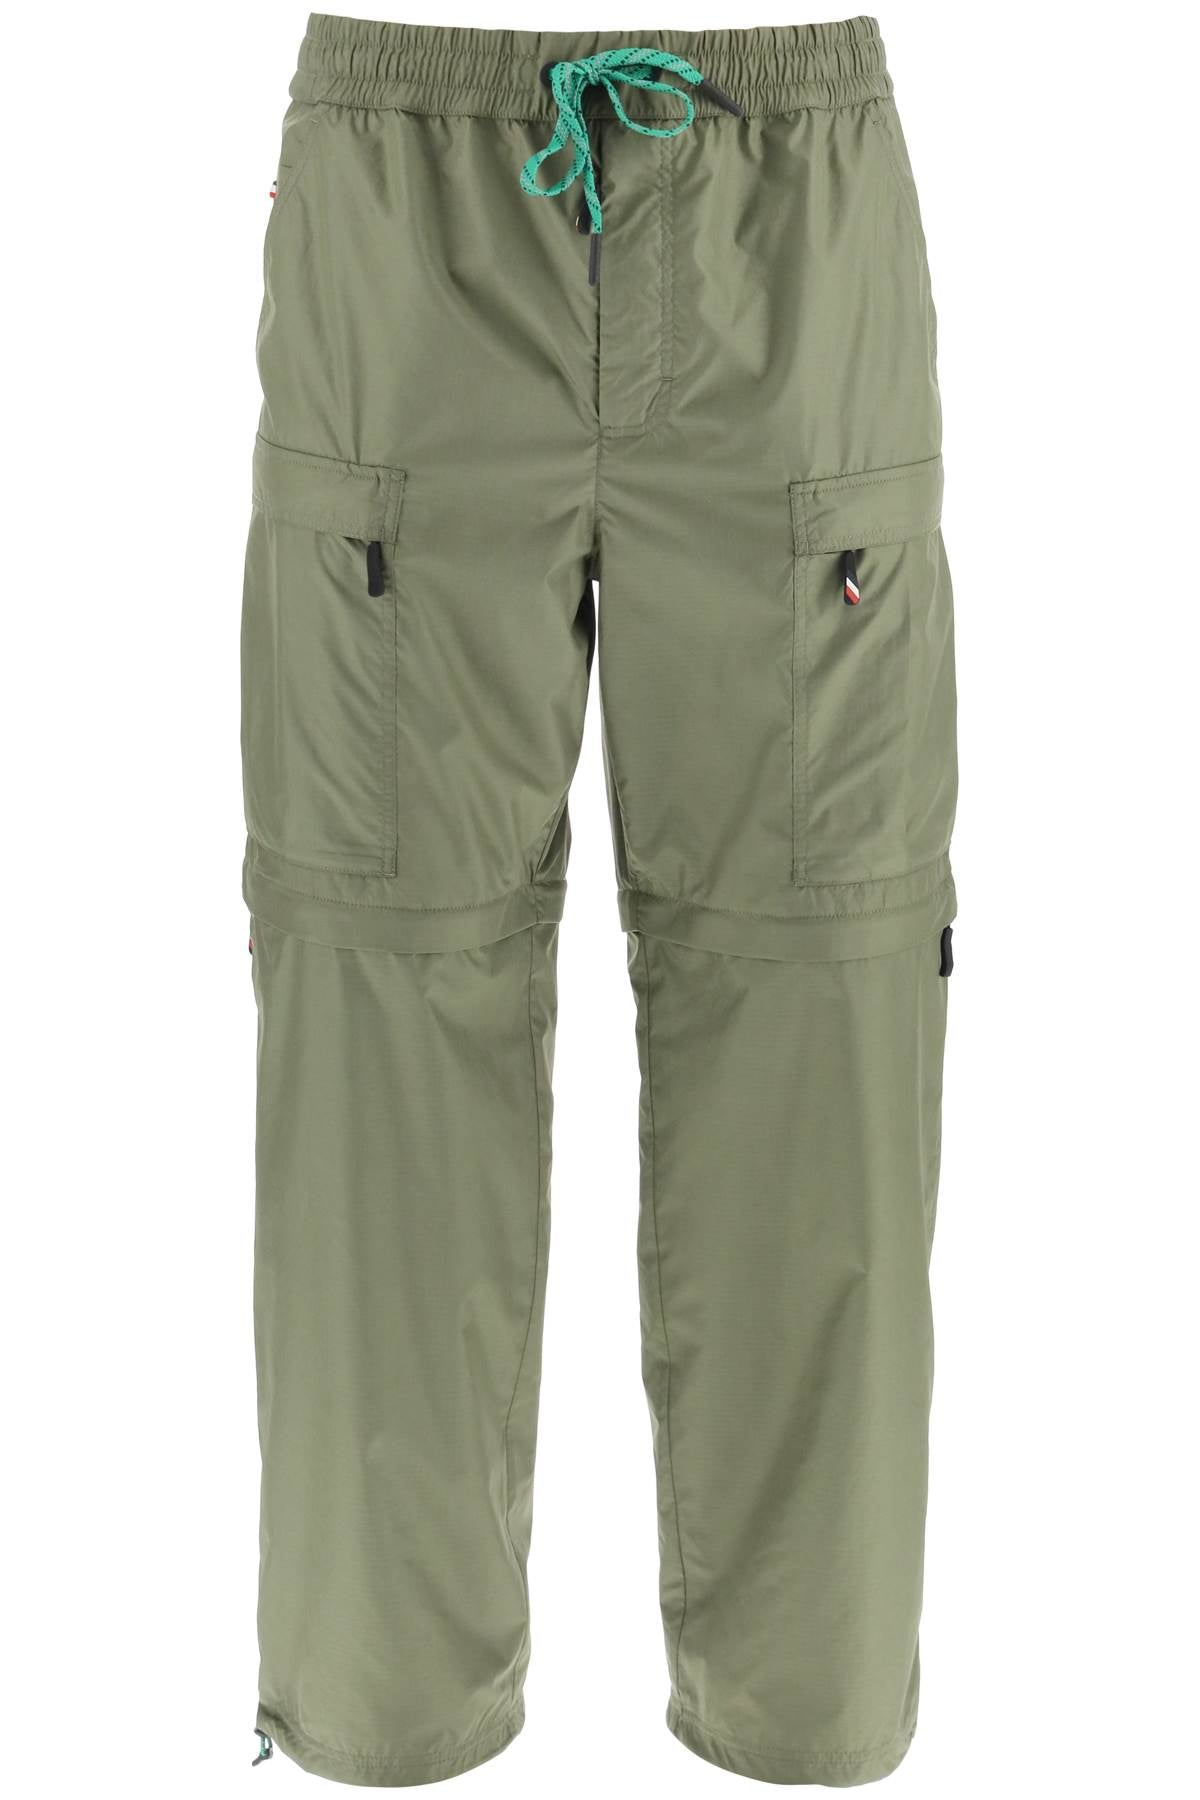 3 MONCLER GRENOBLE Zip-off Convertible Ripstop Pants in Green for